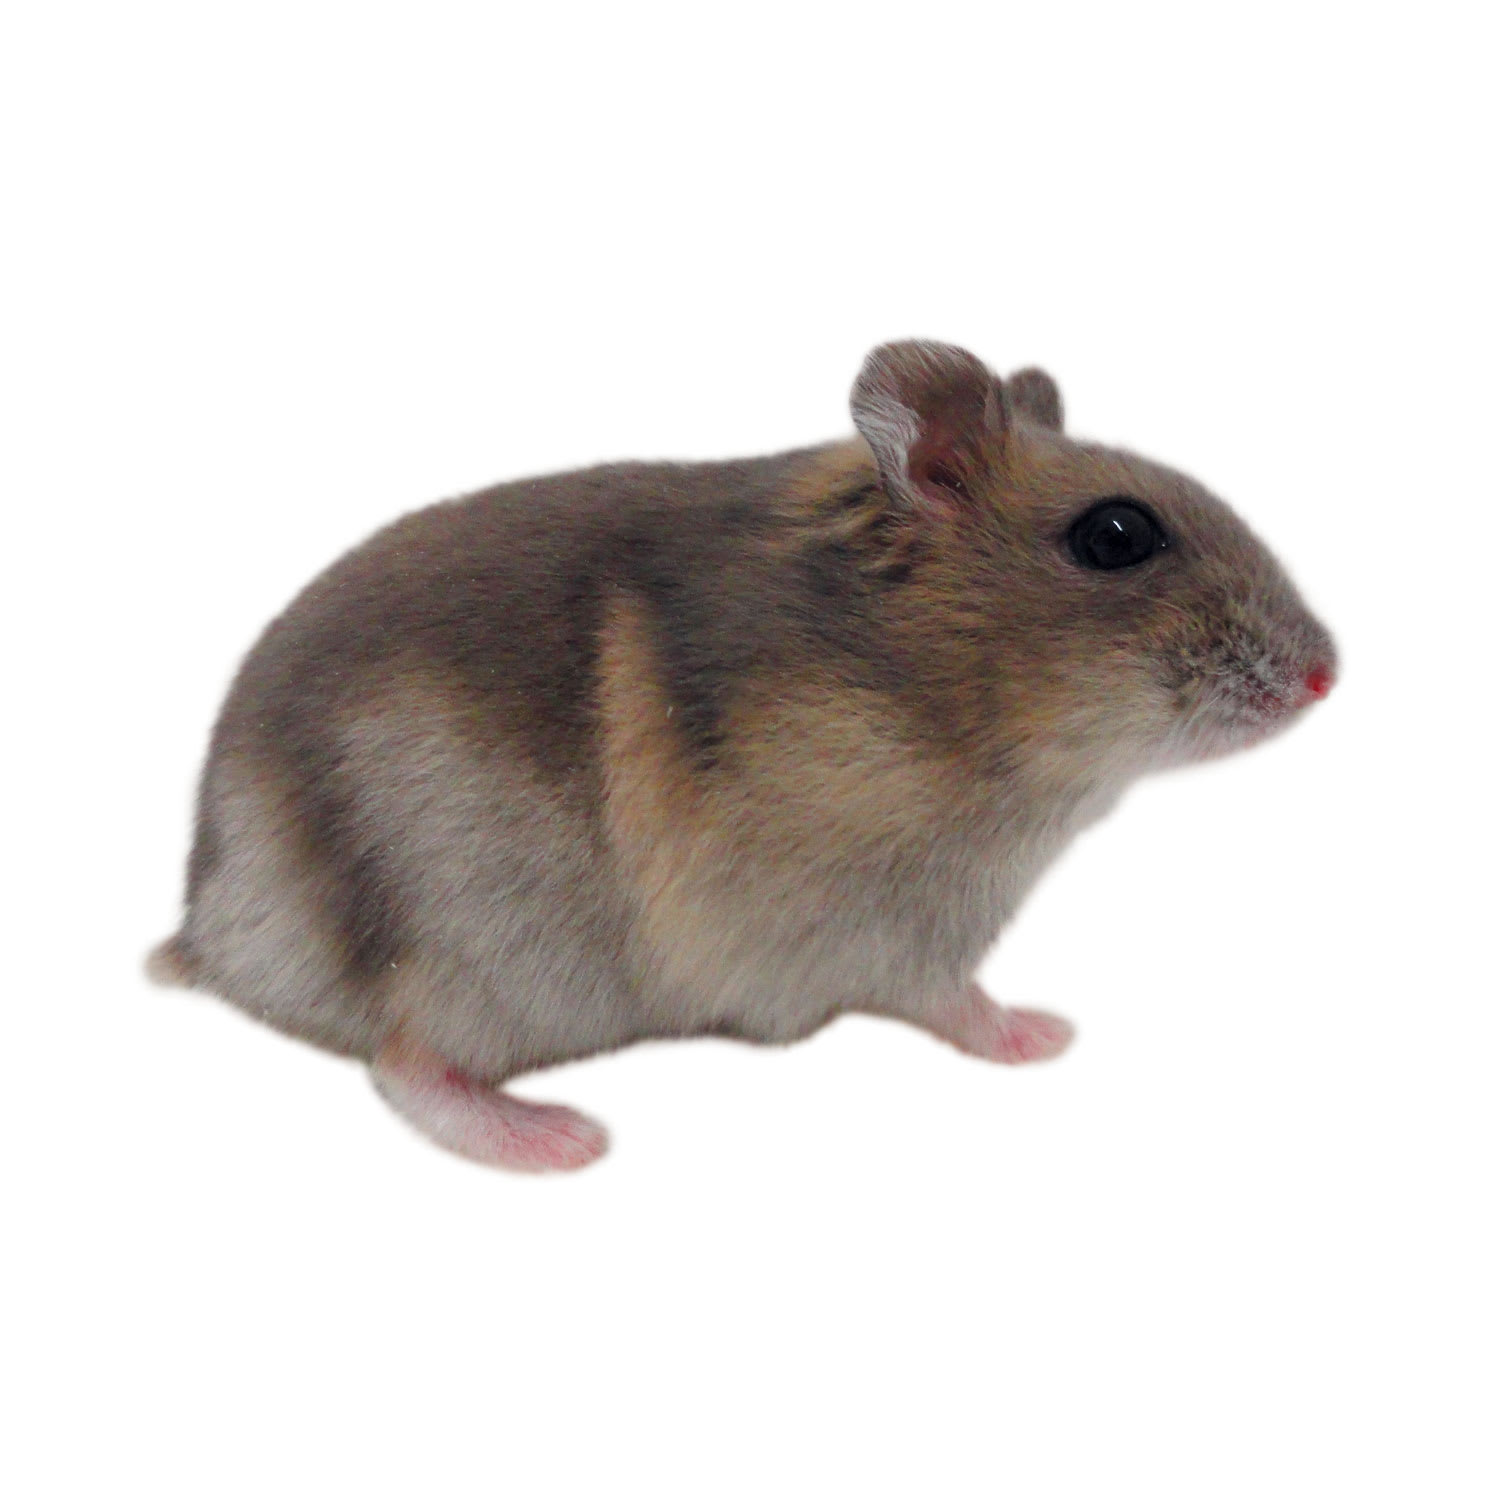 Hamsters For Sale Dwarf Djungarian Hamsters For Sale Petco,What Are Scallops Made Out Of